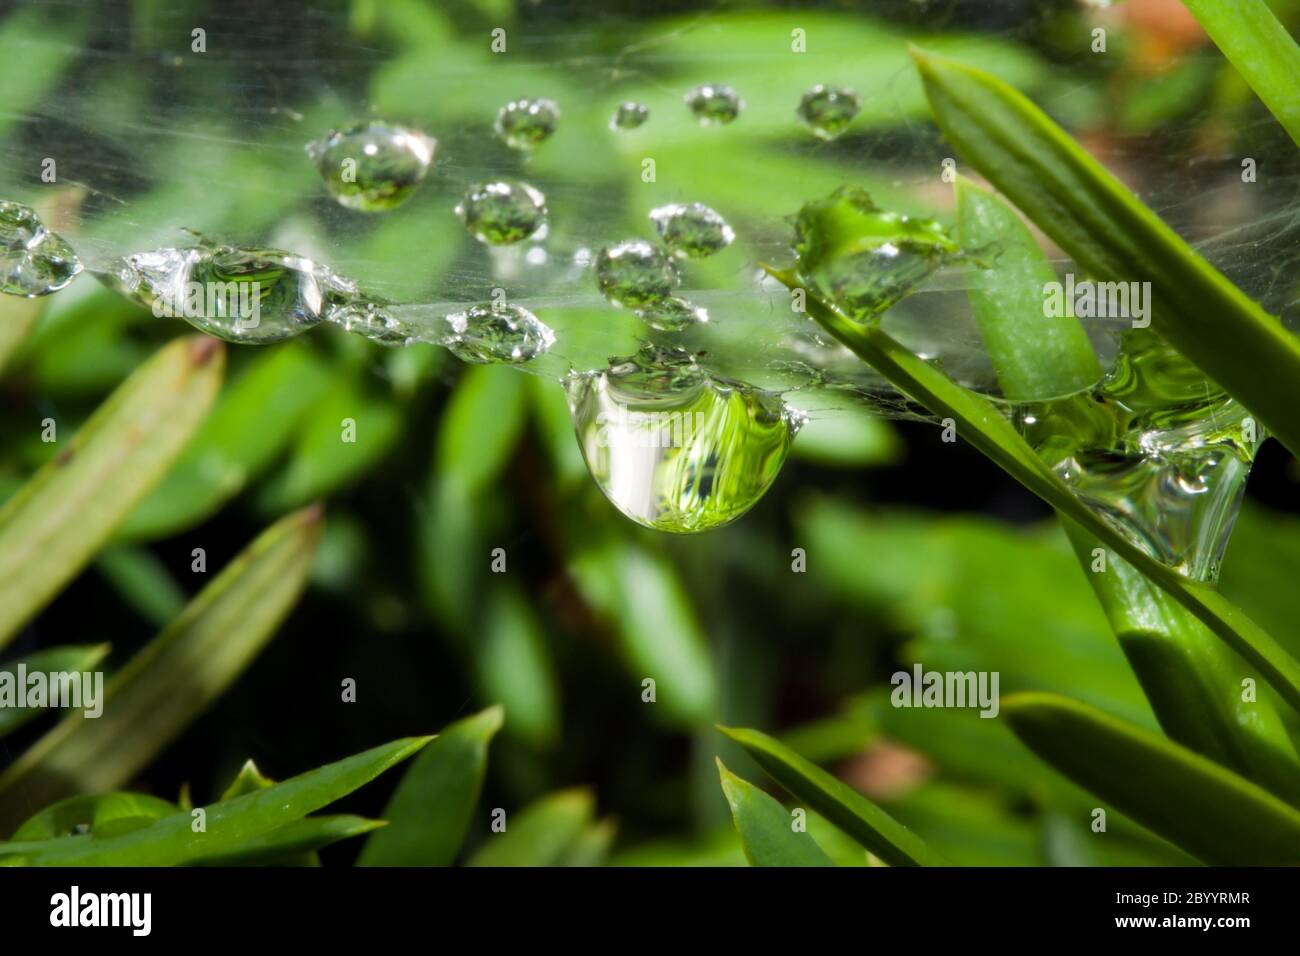 Spider web with dew drops Stock Photo - Alamy